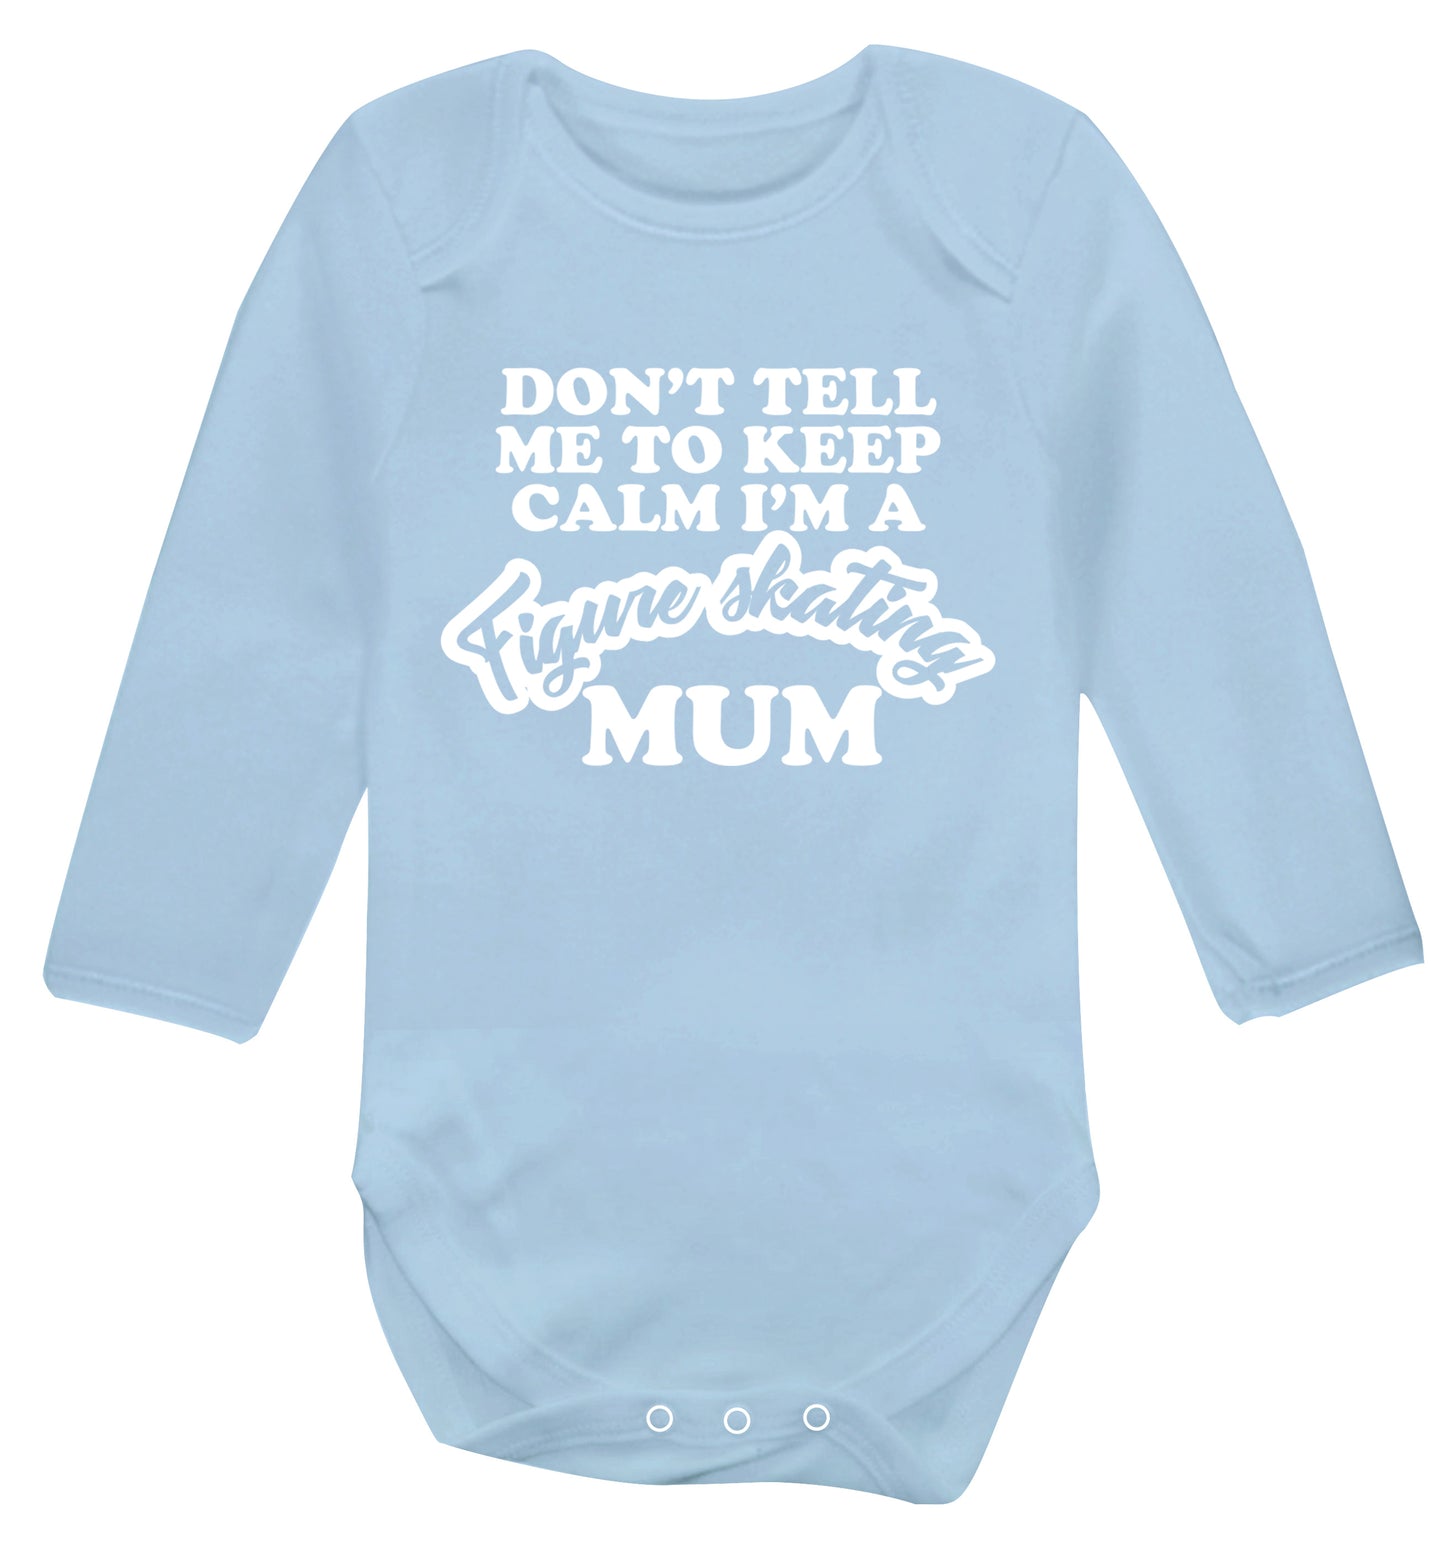 Don't tell me to keep calm I'm a figure skating mum Baby Vest long sleeved pale blue 6-12 months